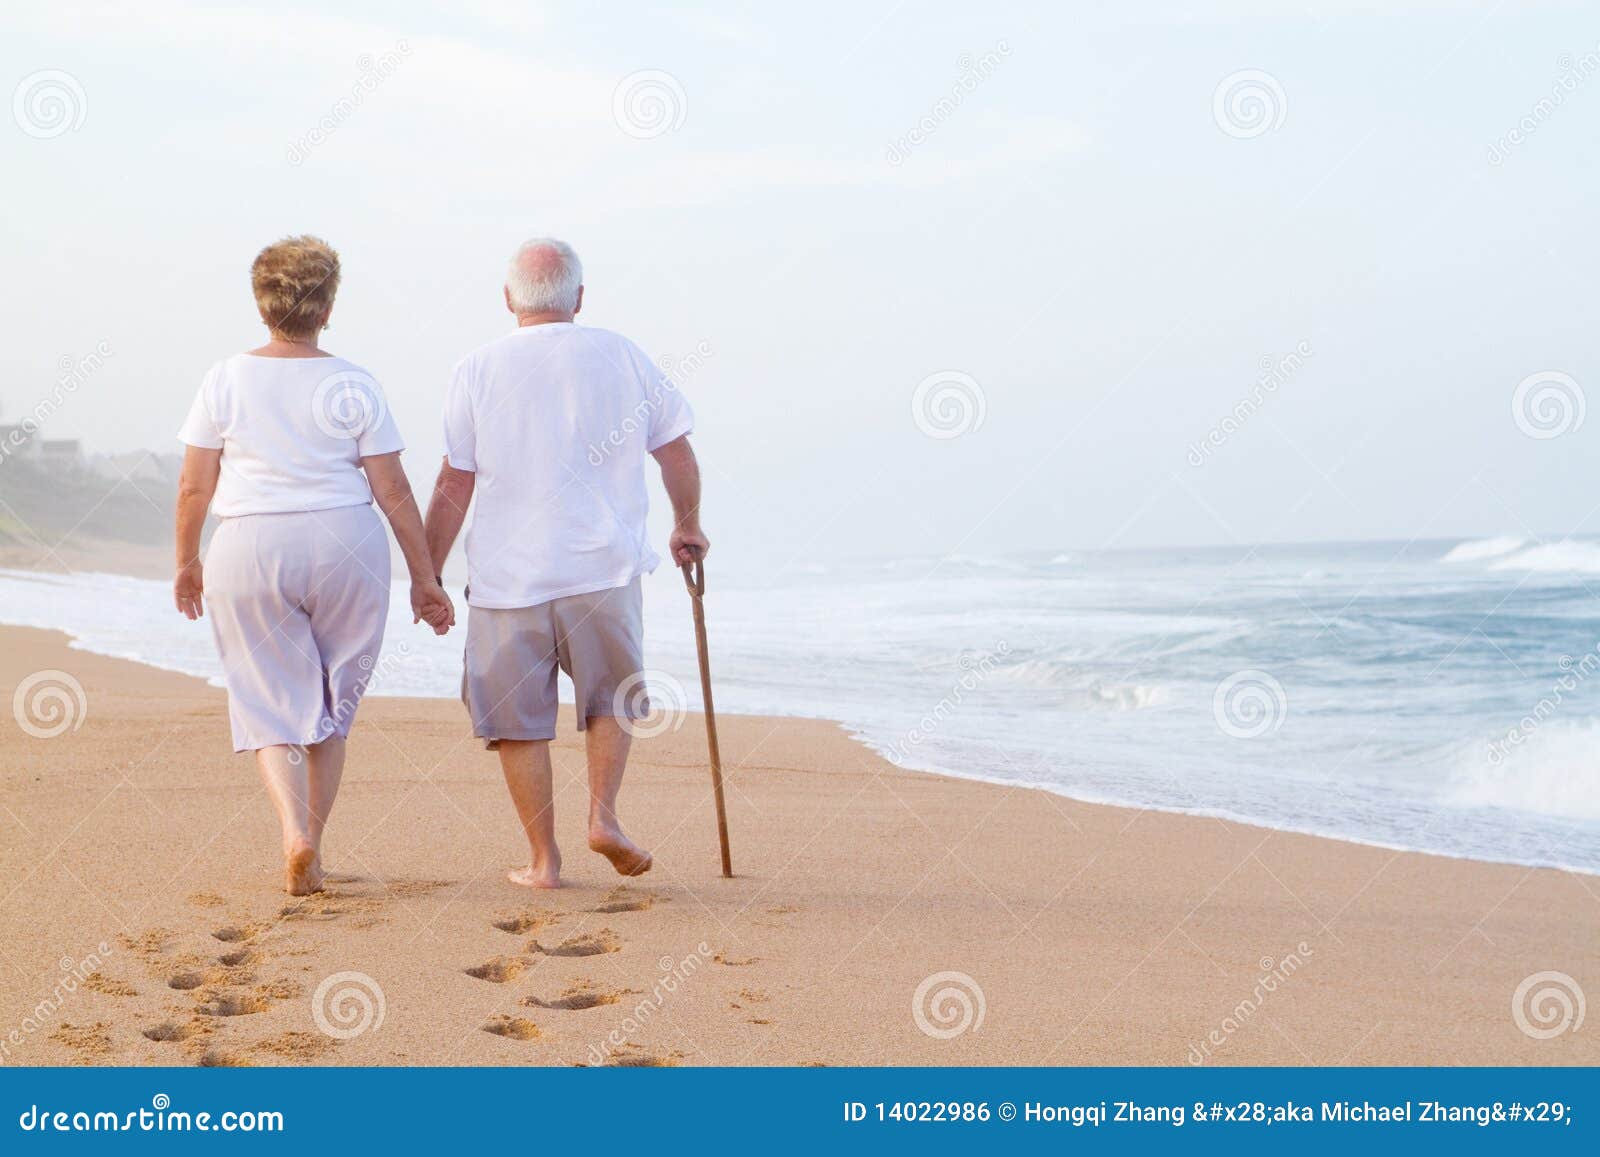 the couple beach Mature nude at